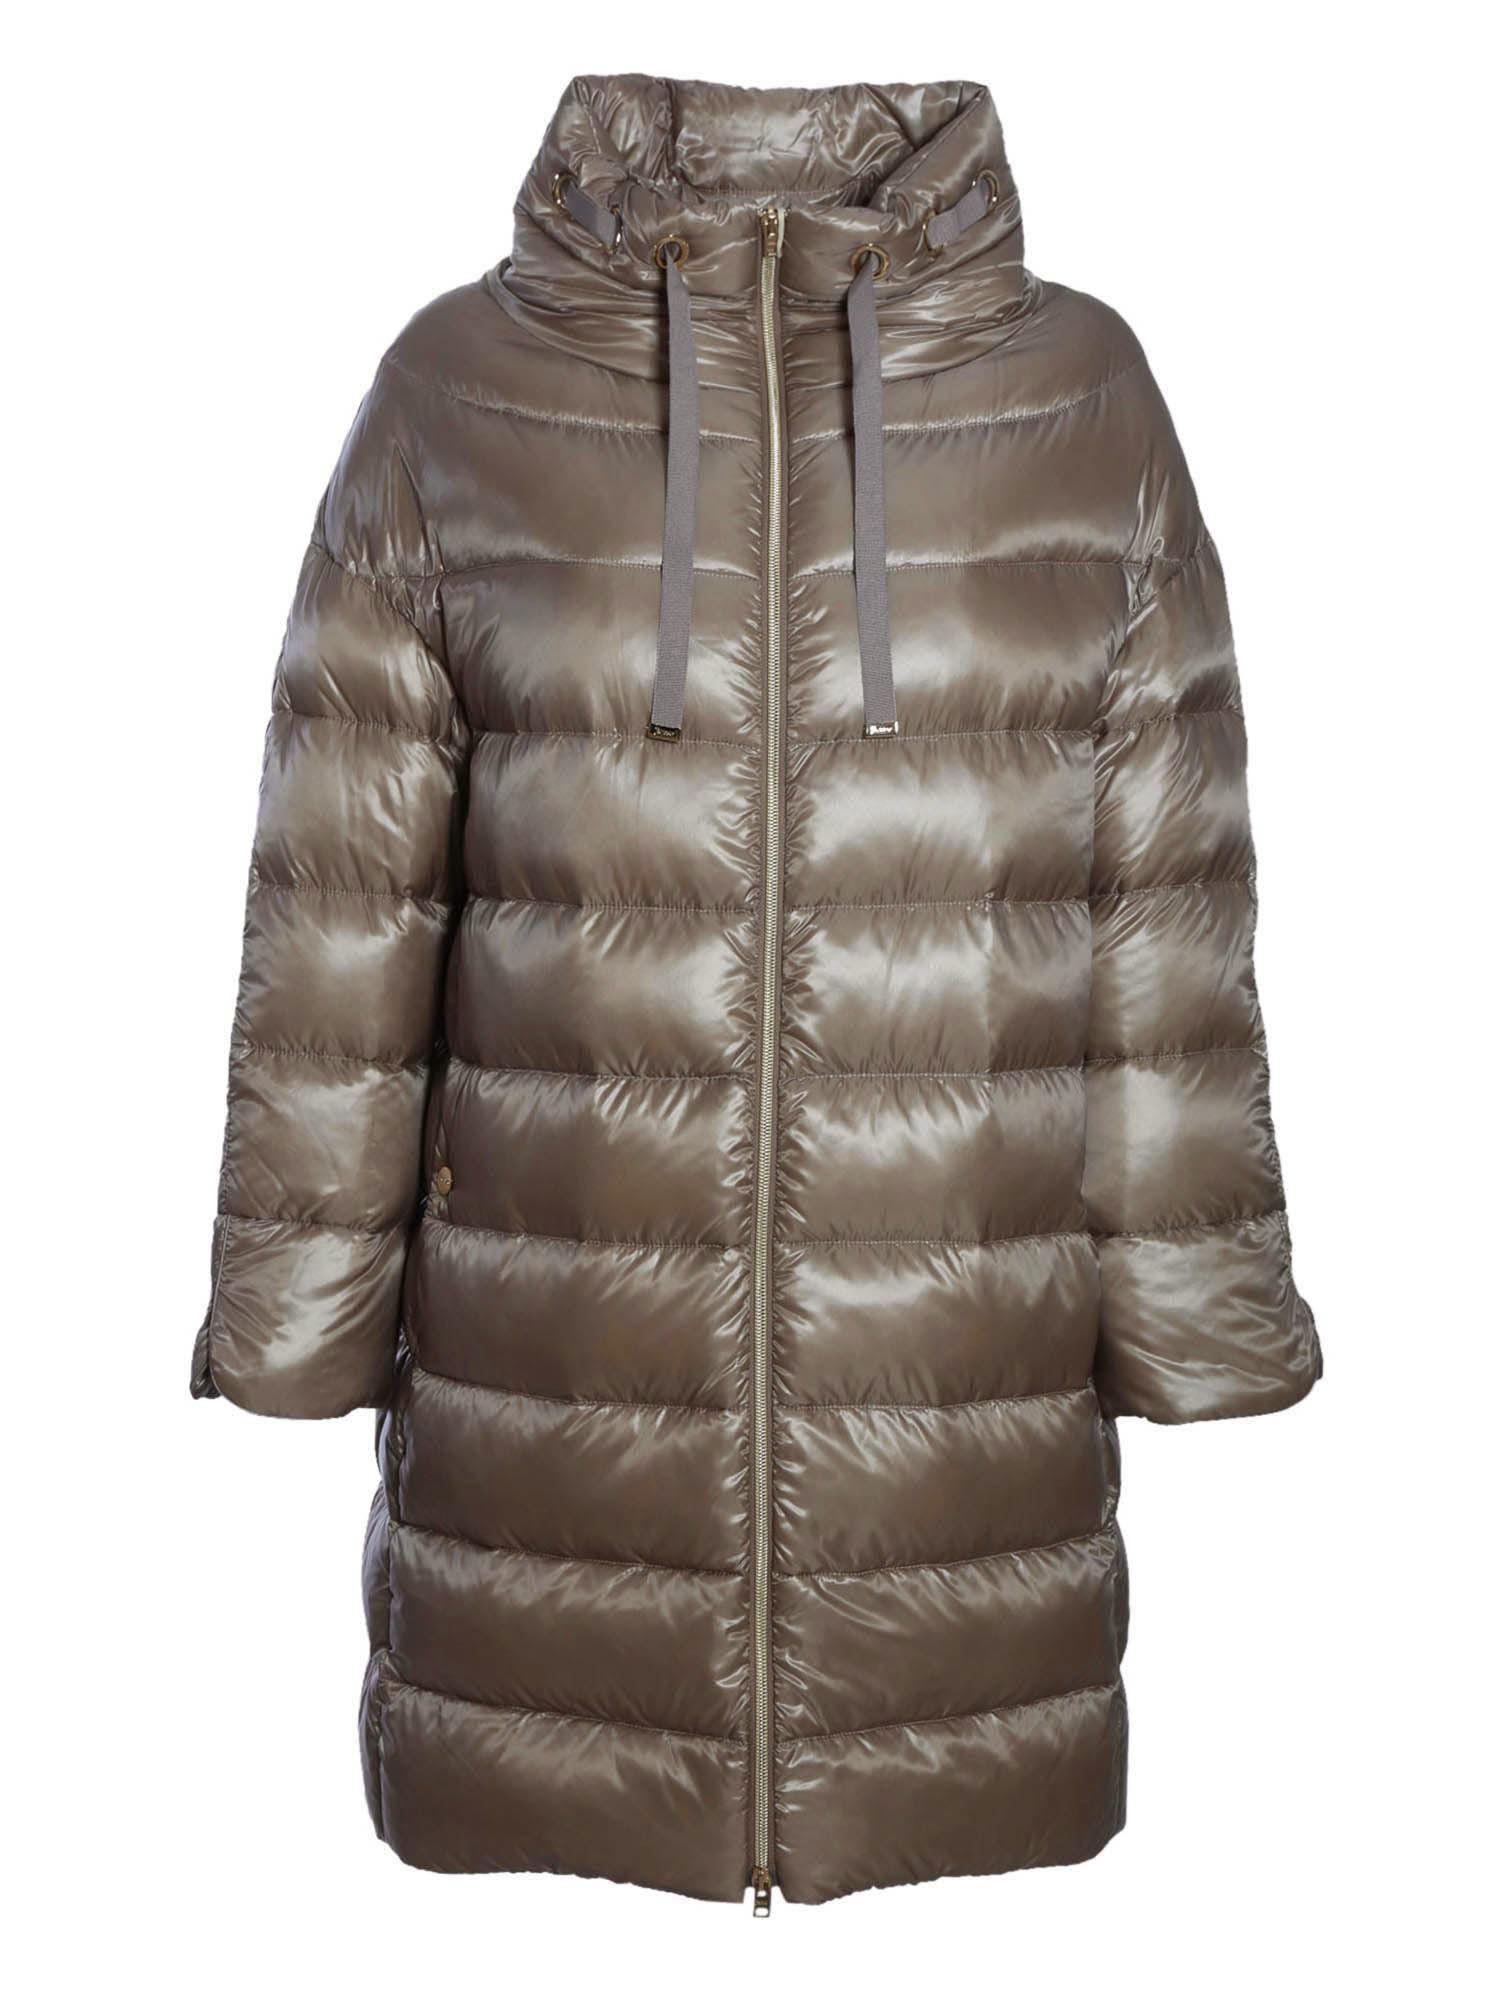 Herno Synthetic Quilted Down Jacket in Beige (Natural) - Lyst